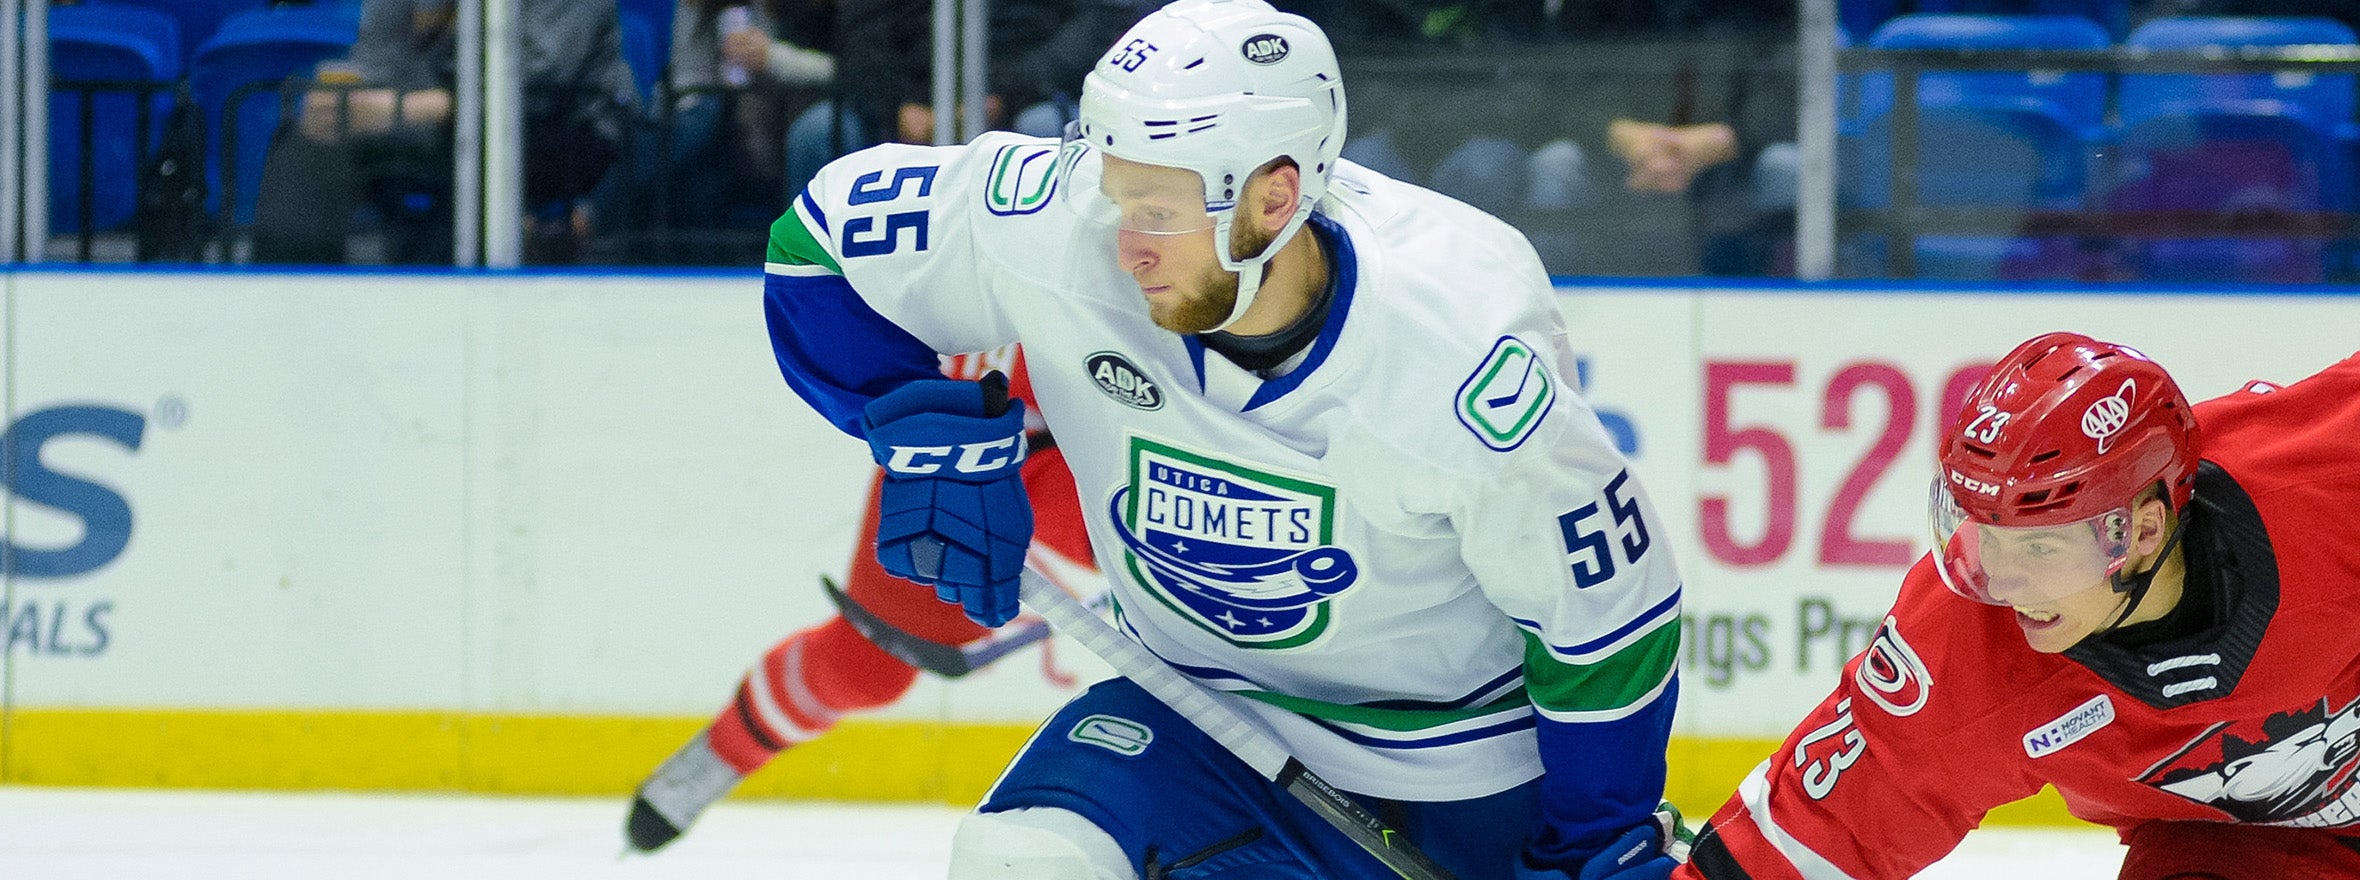 CANUCKS SIGN DEFENSEMAN GUILLAUME BRISEBOIS TO A ONE-YEAR, TWO WAY CONTRACT